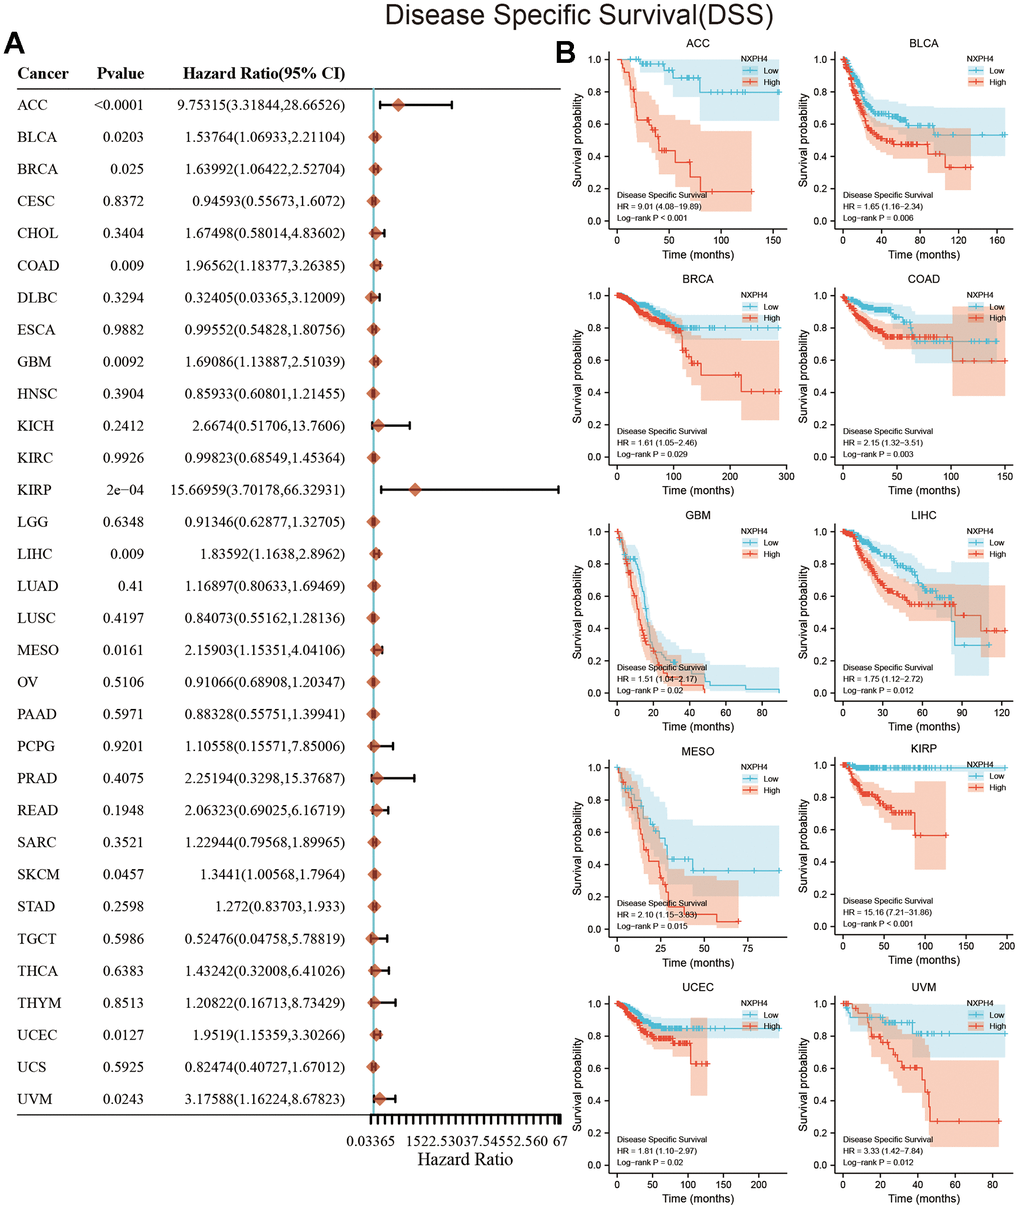 Relationship between NXPH4 expression and DSS in pan-cancer. (A) Univariate Cox analysis showed the relationship between NXPH4 and DSS in pan-cancer. (B) K-M survival analysis showed the relationship between NXPH4 and DSS in pan-cancer.